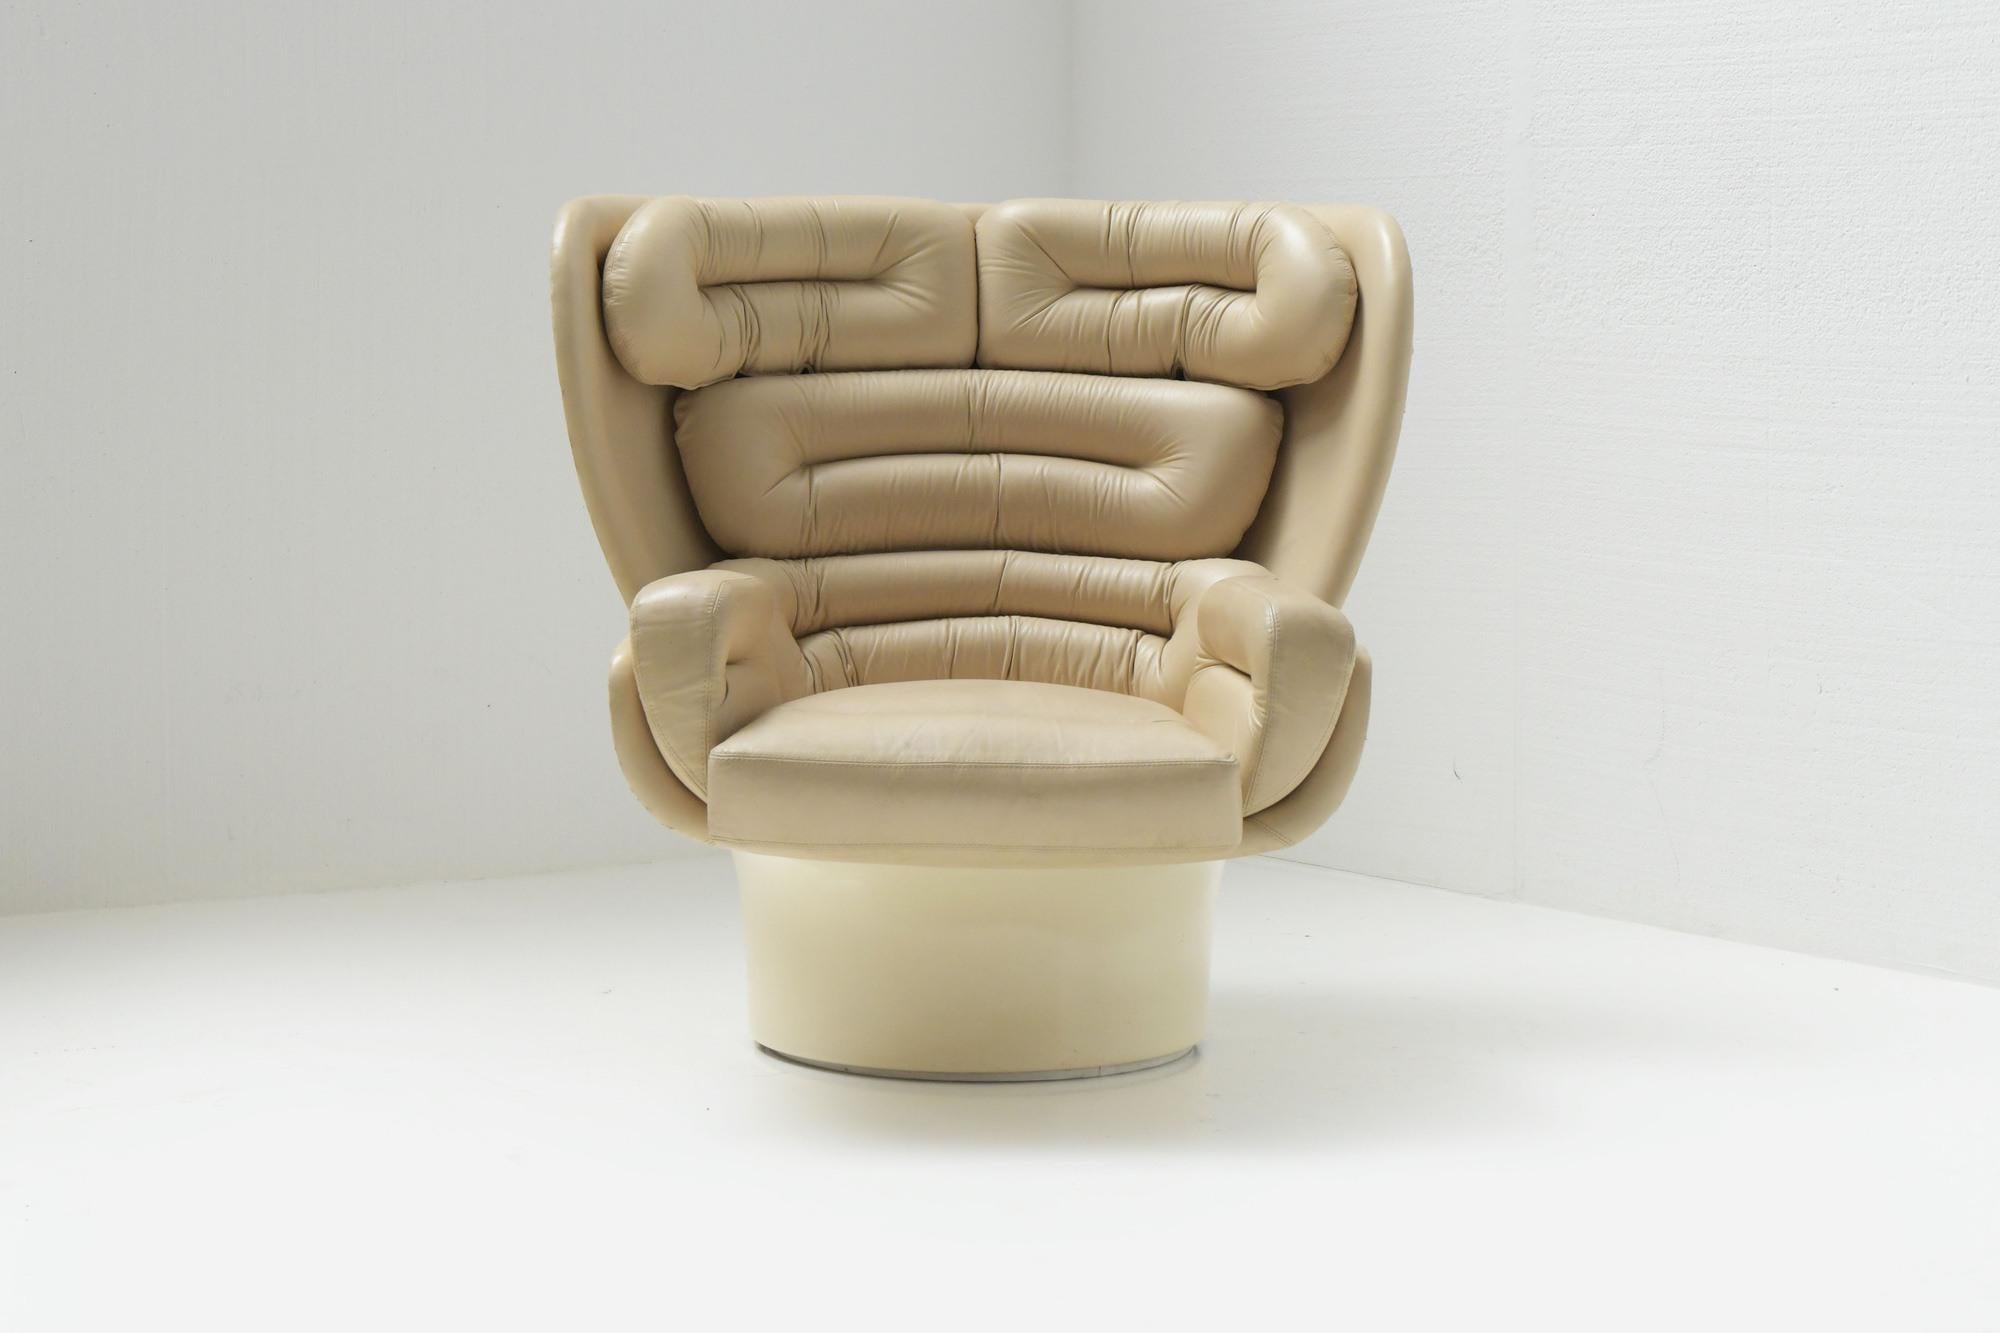 Italian Elda Chair in Cream Leather by Joe Colombo for Comfort Italy